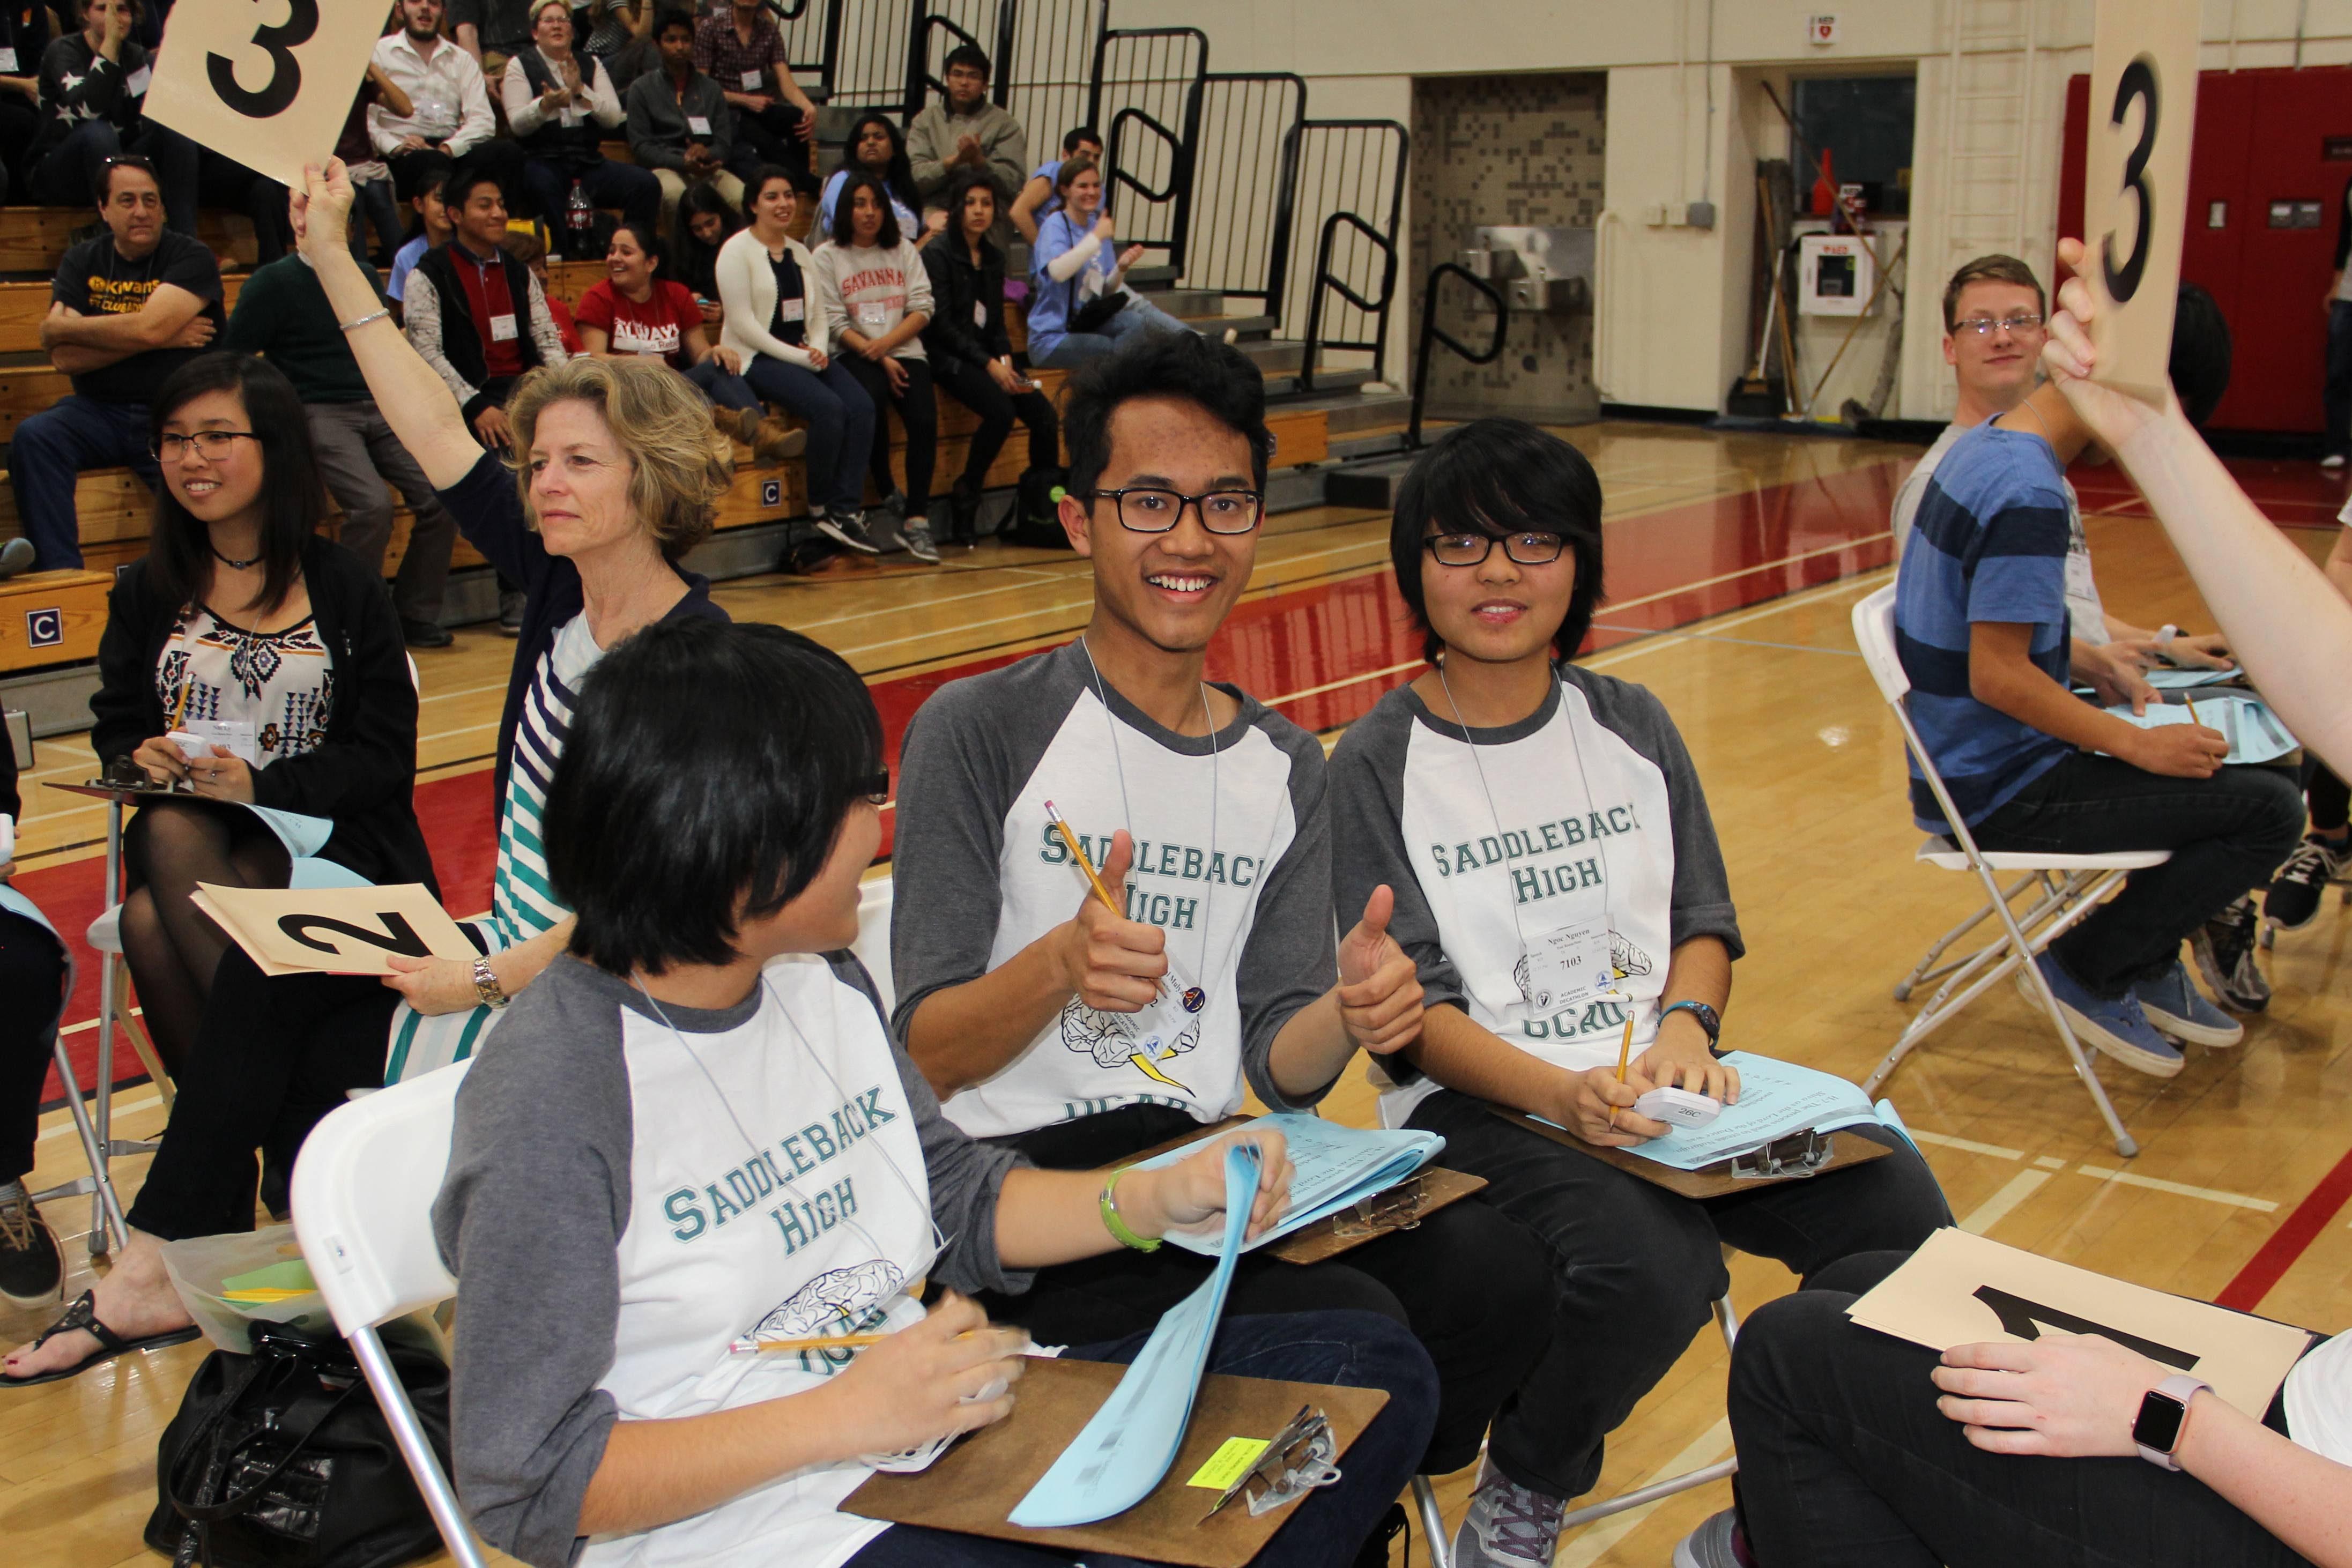 Students smiling at the Orange County Academic Decathlon